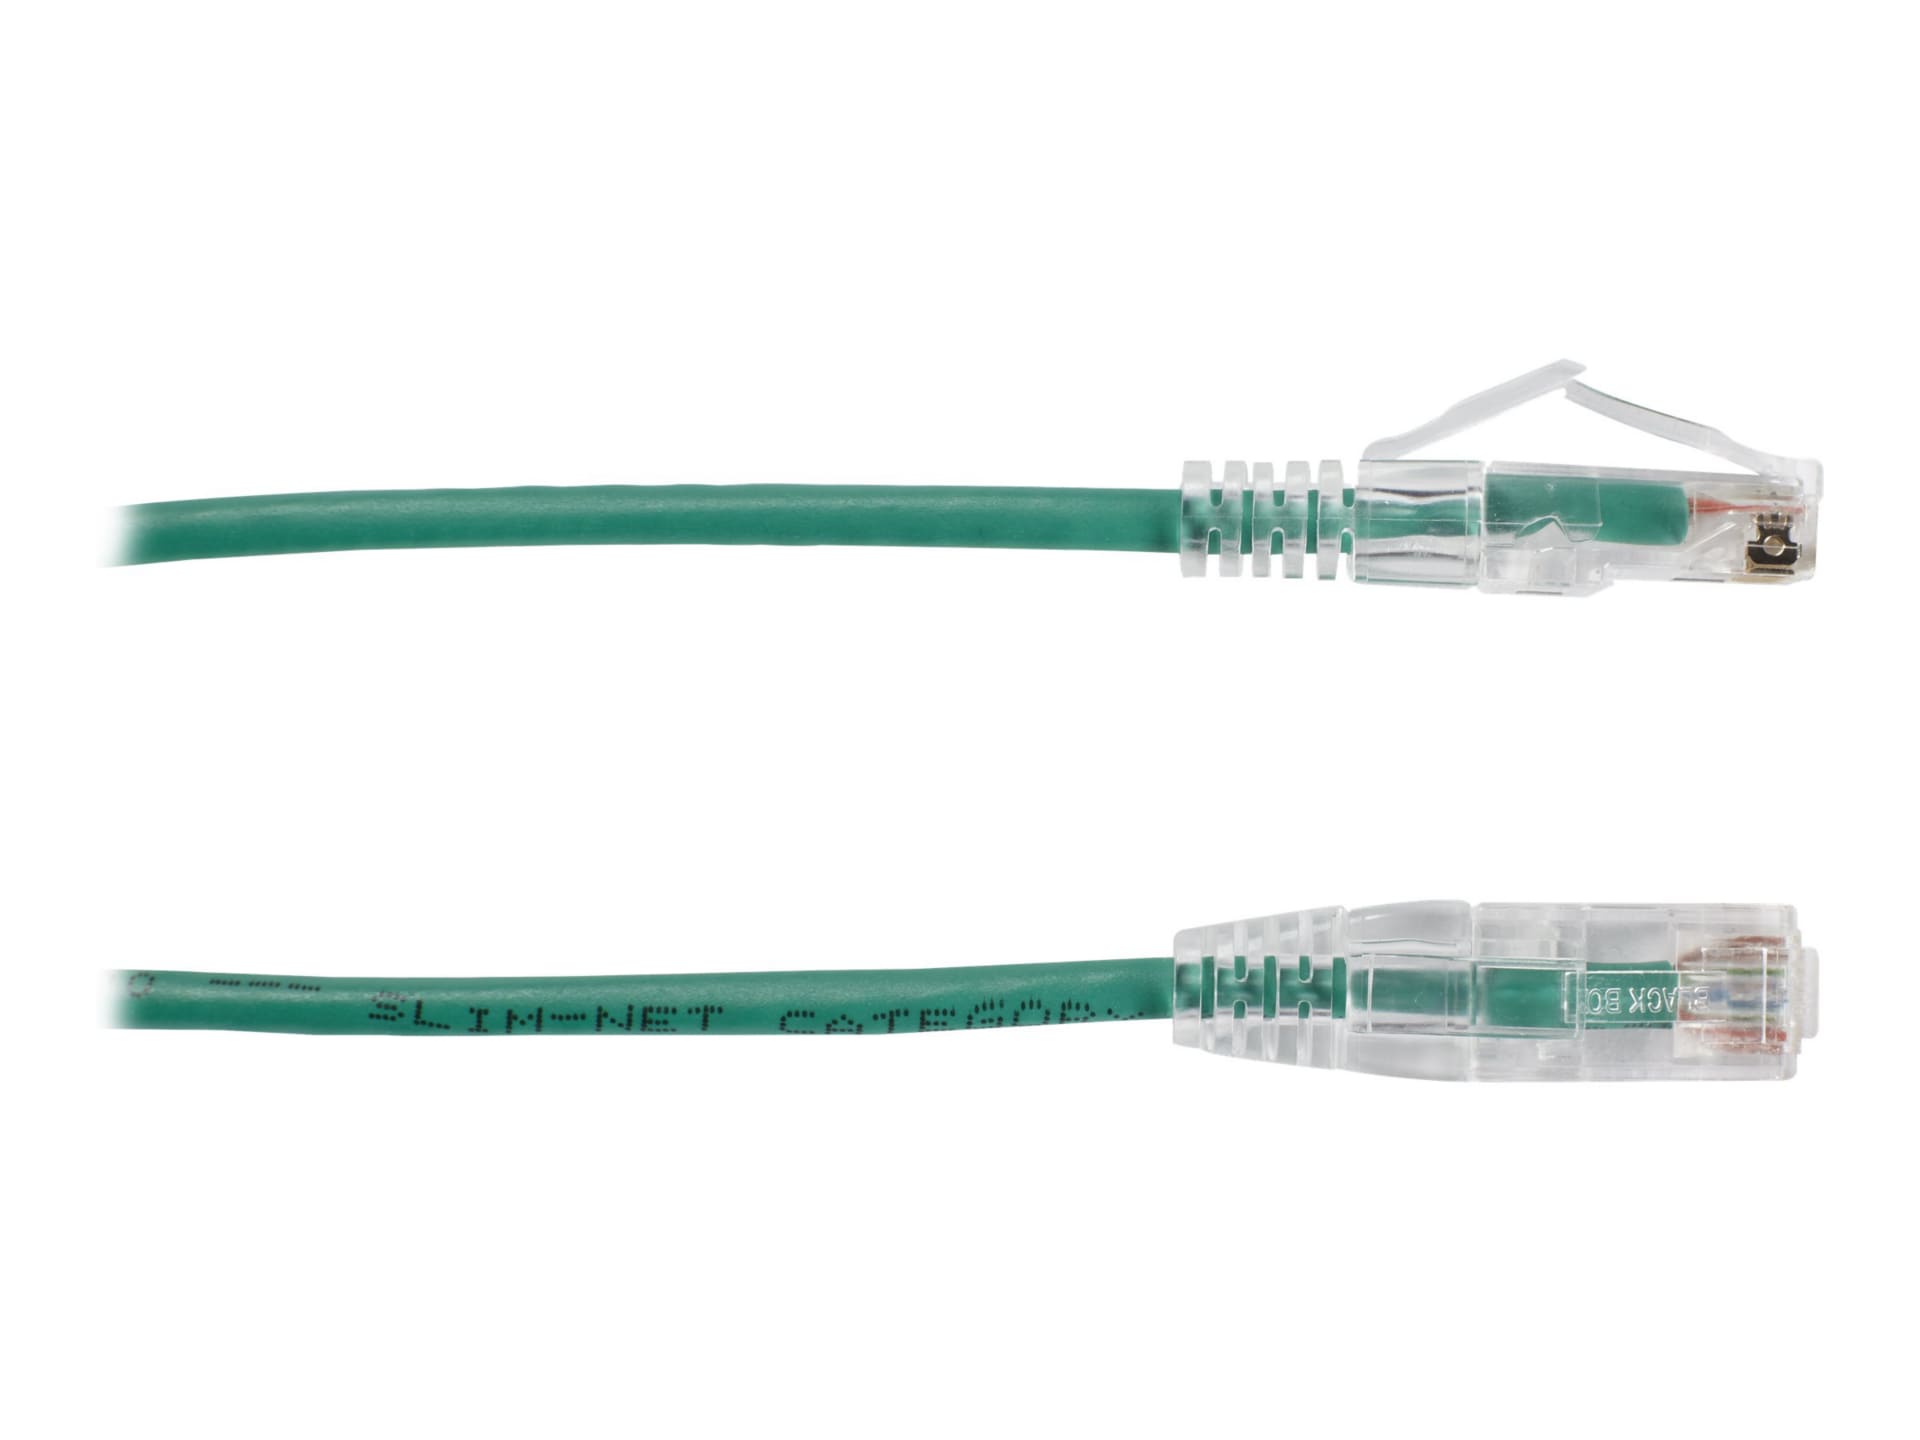 Black Box Slim-Net patch cable - 2 ft - green